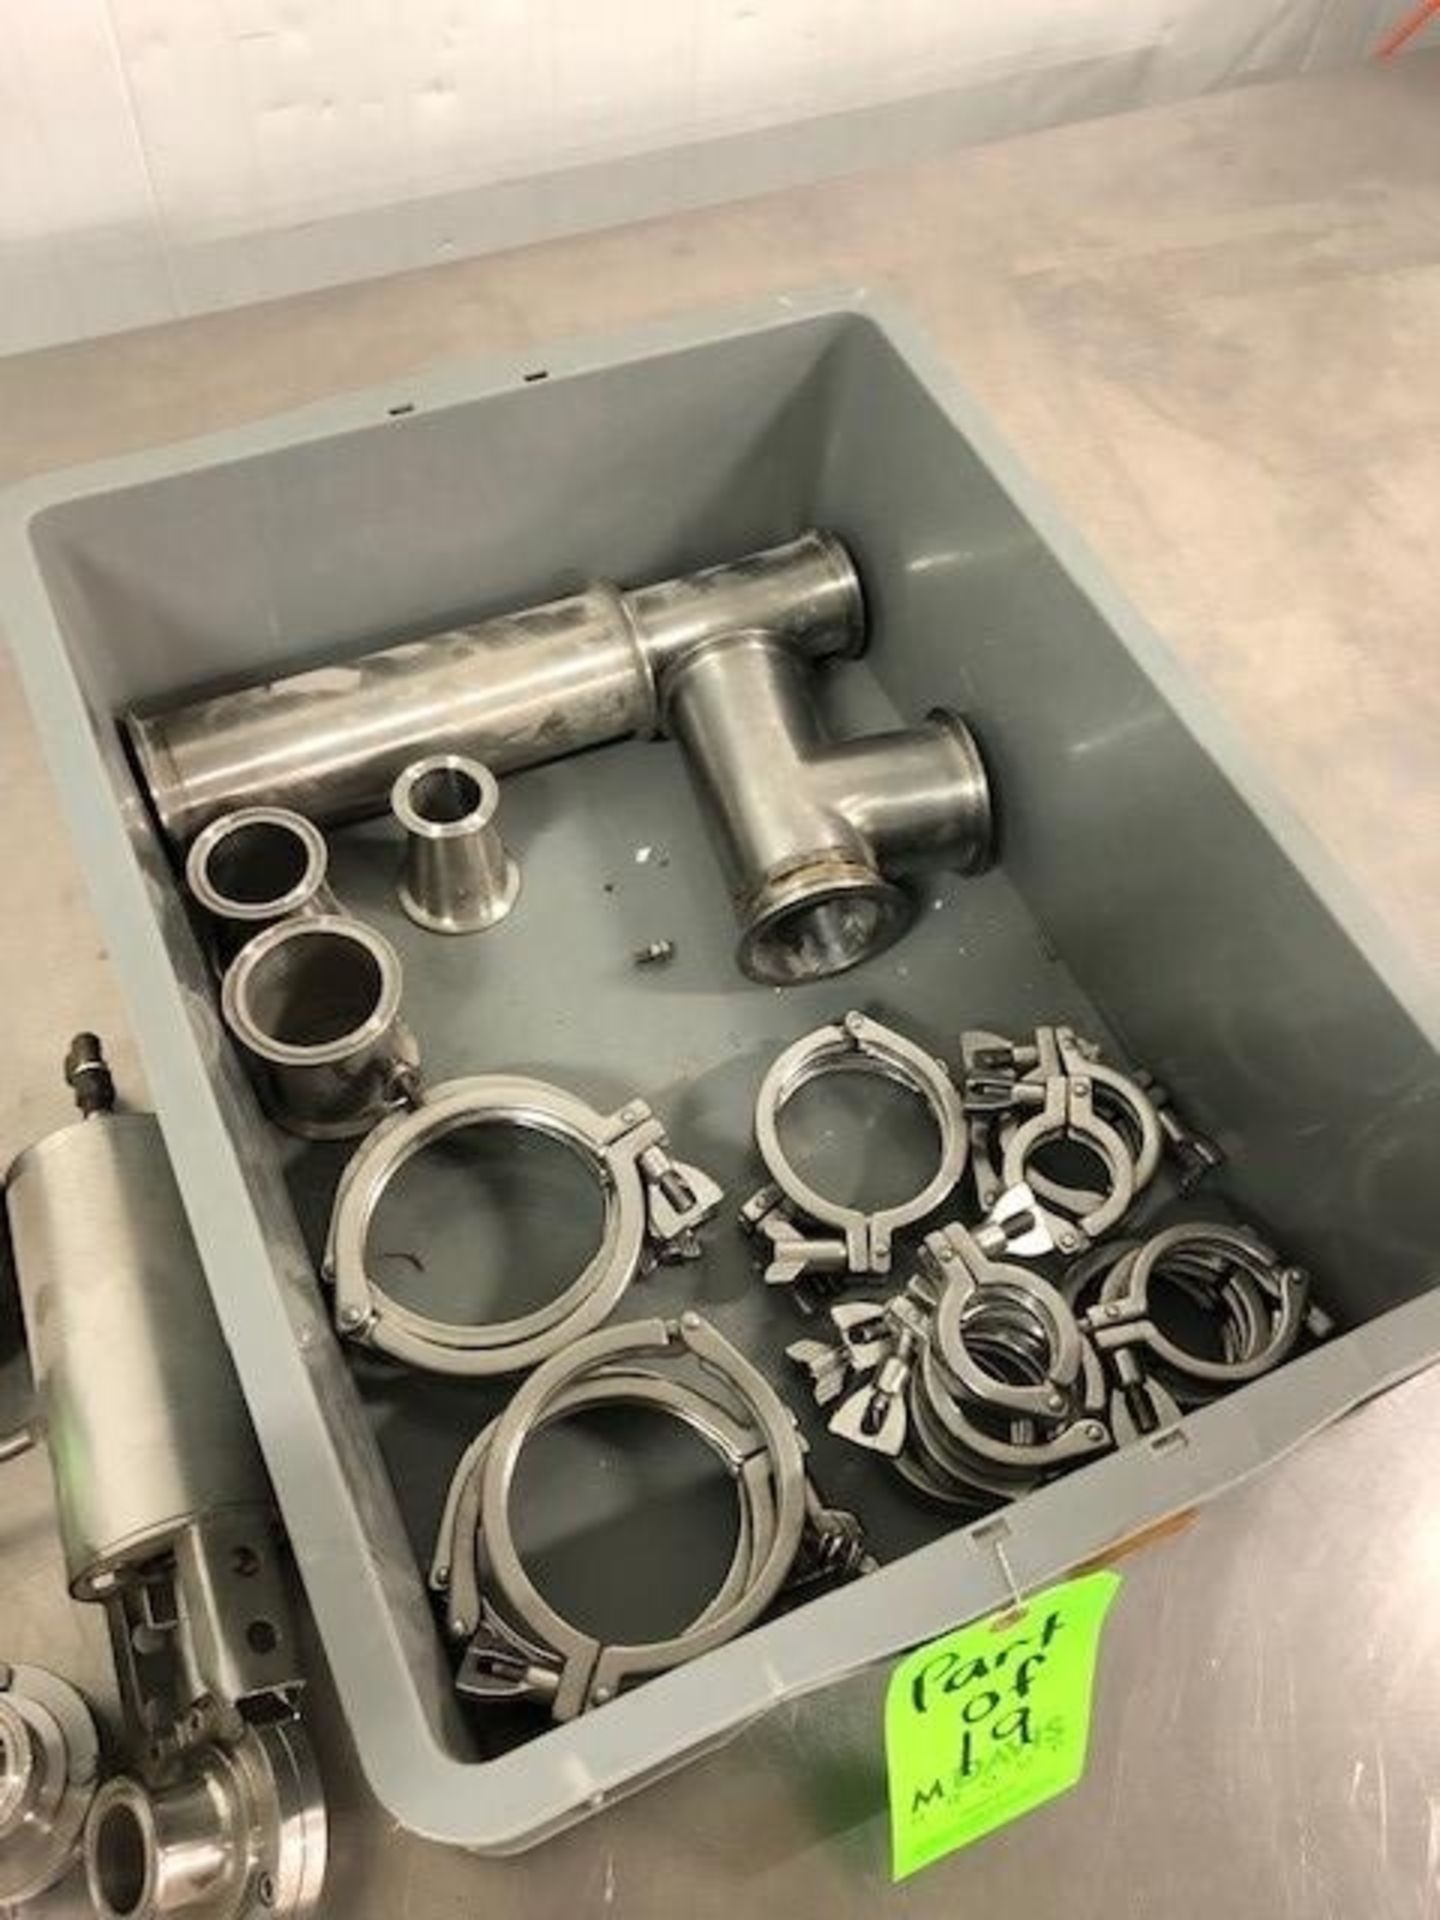 Lot of Assorted S/S Butterfly Valves, S/S Clamps, & S/S Reducers, Including (1) Air Actuated - Image 2 of 2